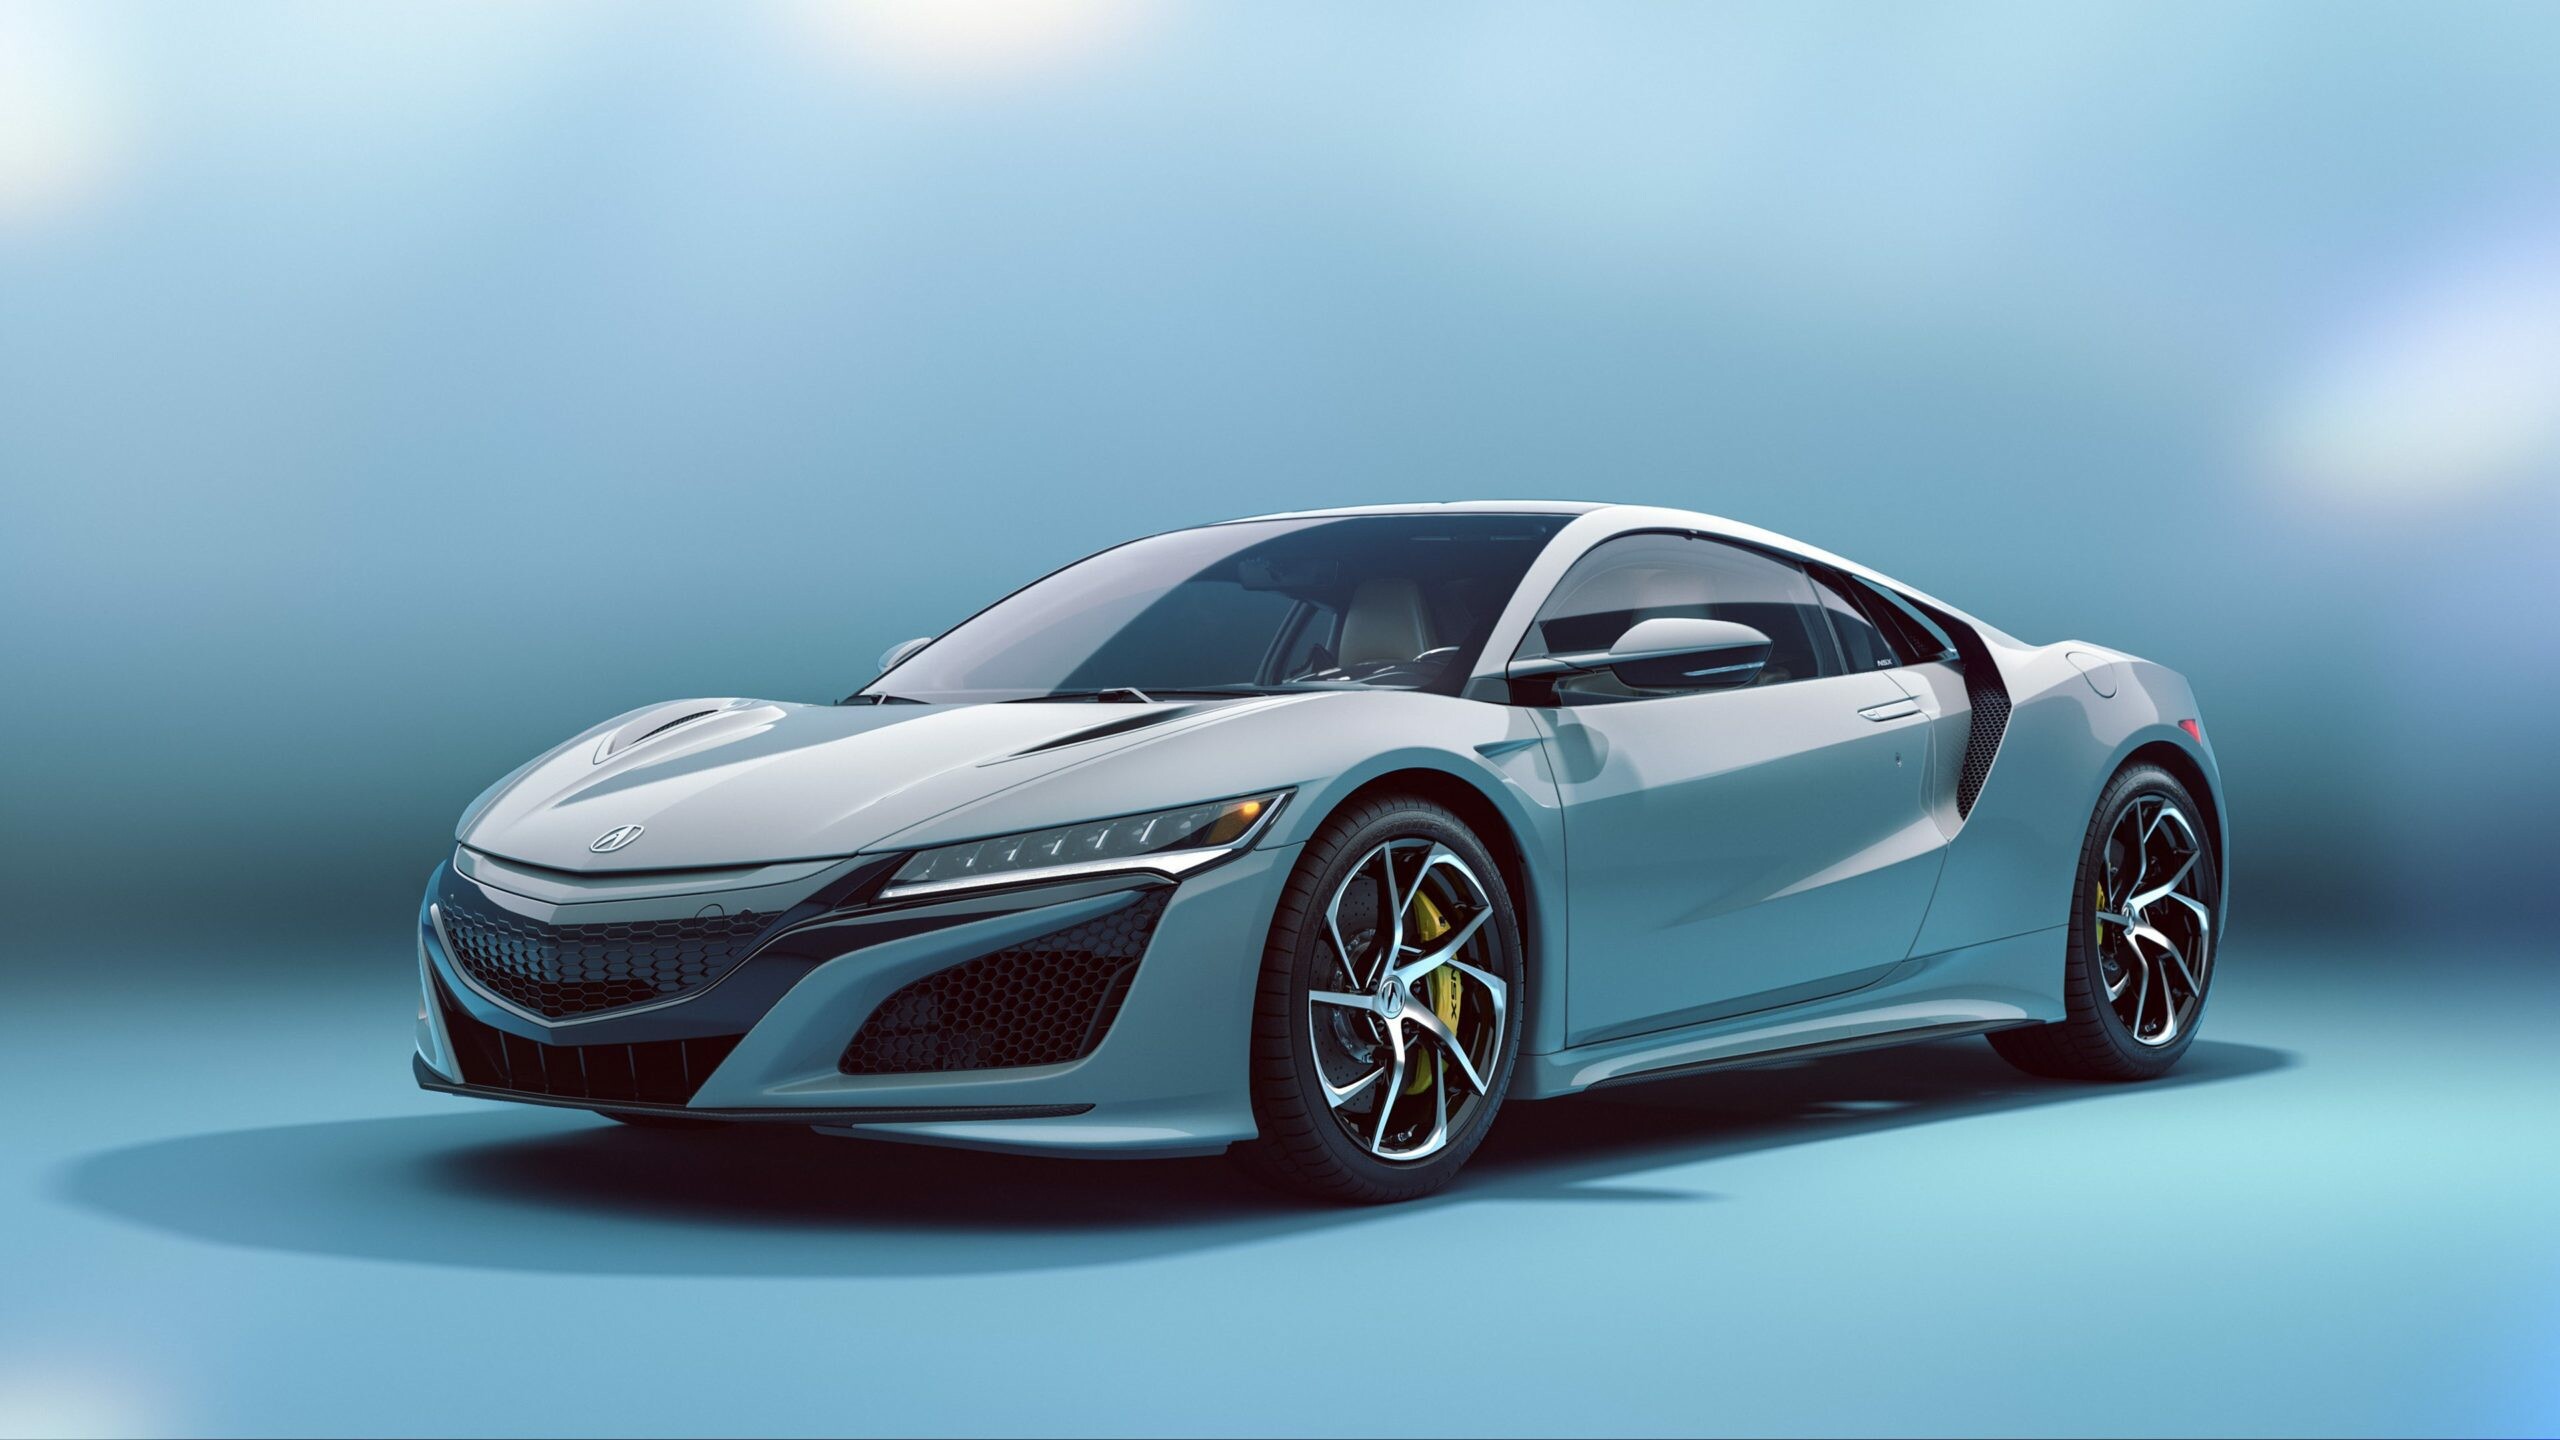 Acura: Japanese car company, The NSX, Origins trace back to 1984. 2560x1440 HD Wallpaper.